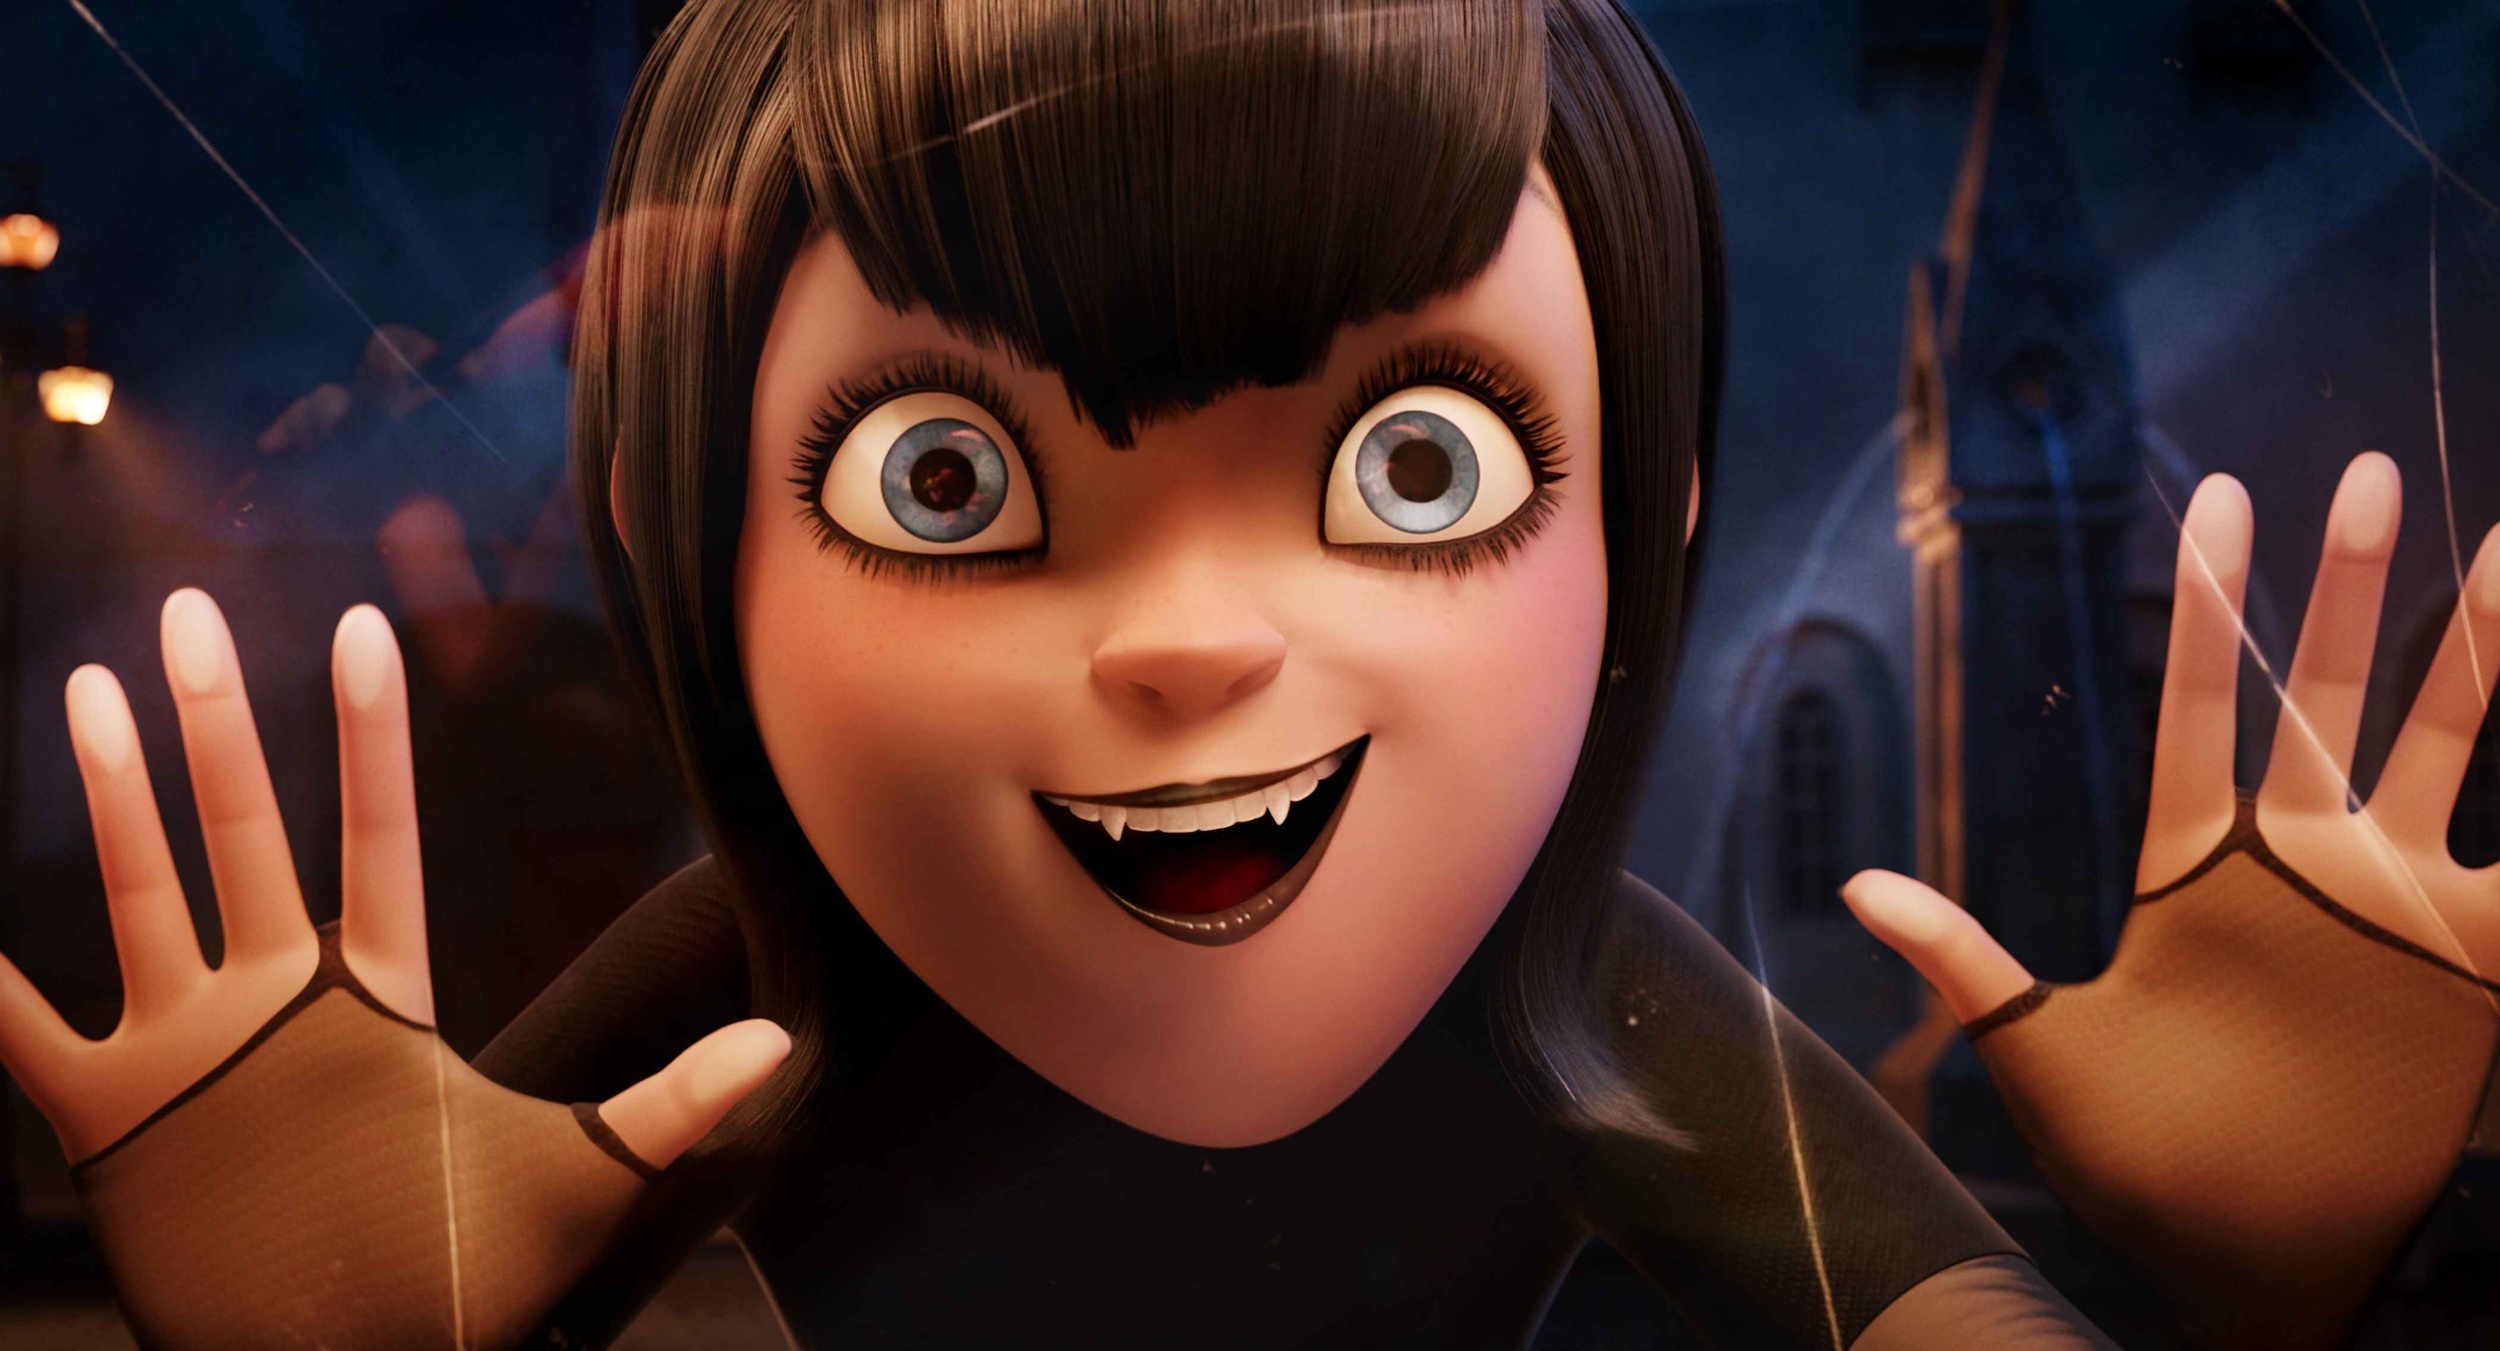 <p><span>Vampires have a grasp on people like no other mythical creature, so it’s no wonder Mavis Dracula found herself a fan-favorite soon after the release of <em>Hotel Transylvania</em>.</span></p><p>You may also like: <a href='https://www.yardbarker.com/entertainment/articles/the_25_best_musicians_turned_actors_032724/s1__29781515'>The 25 best musicians-turned-actors</a></p>